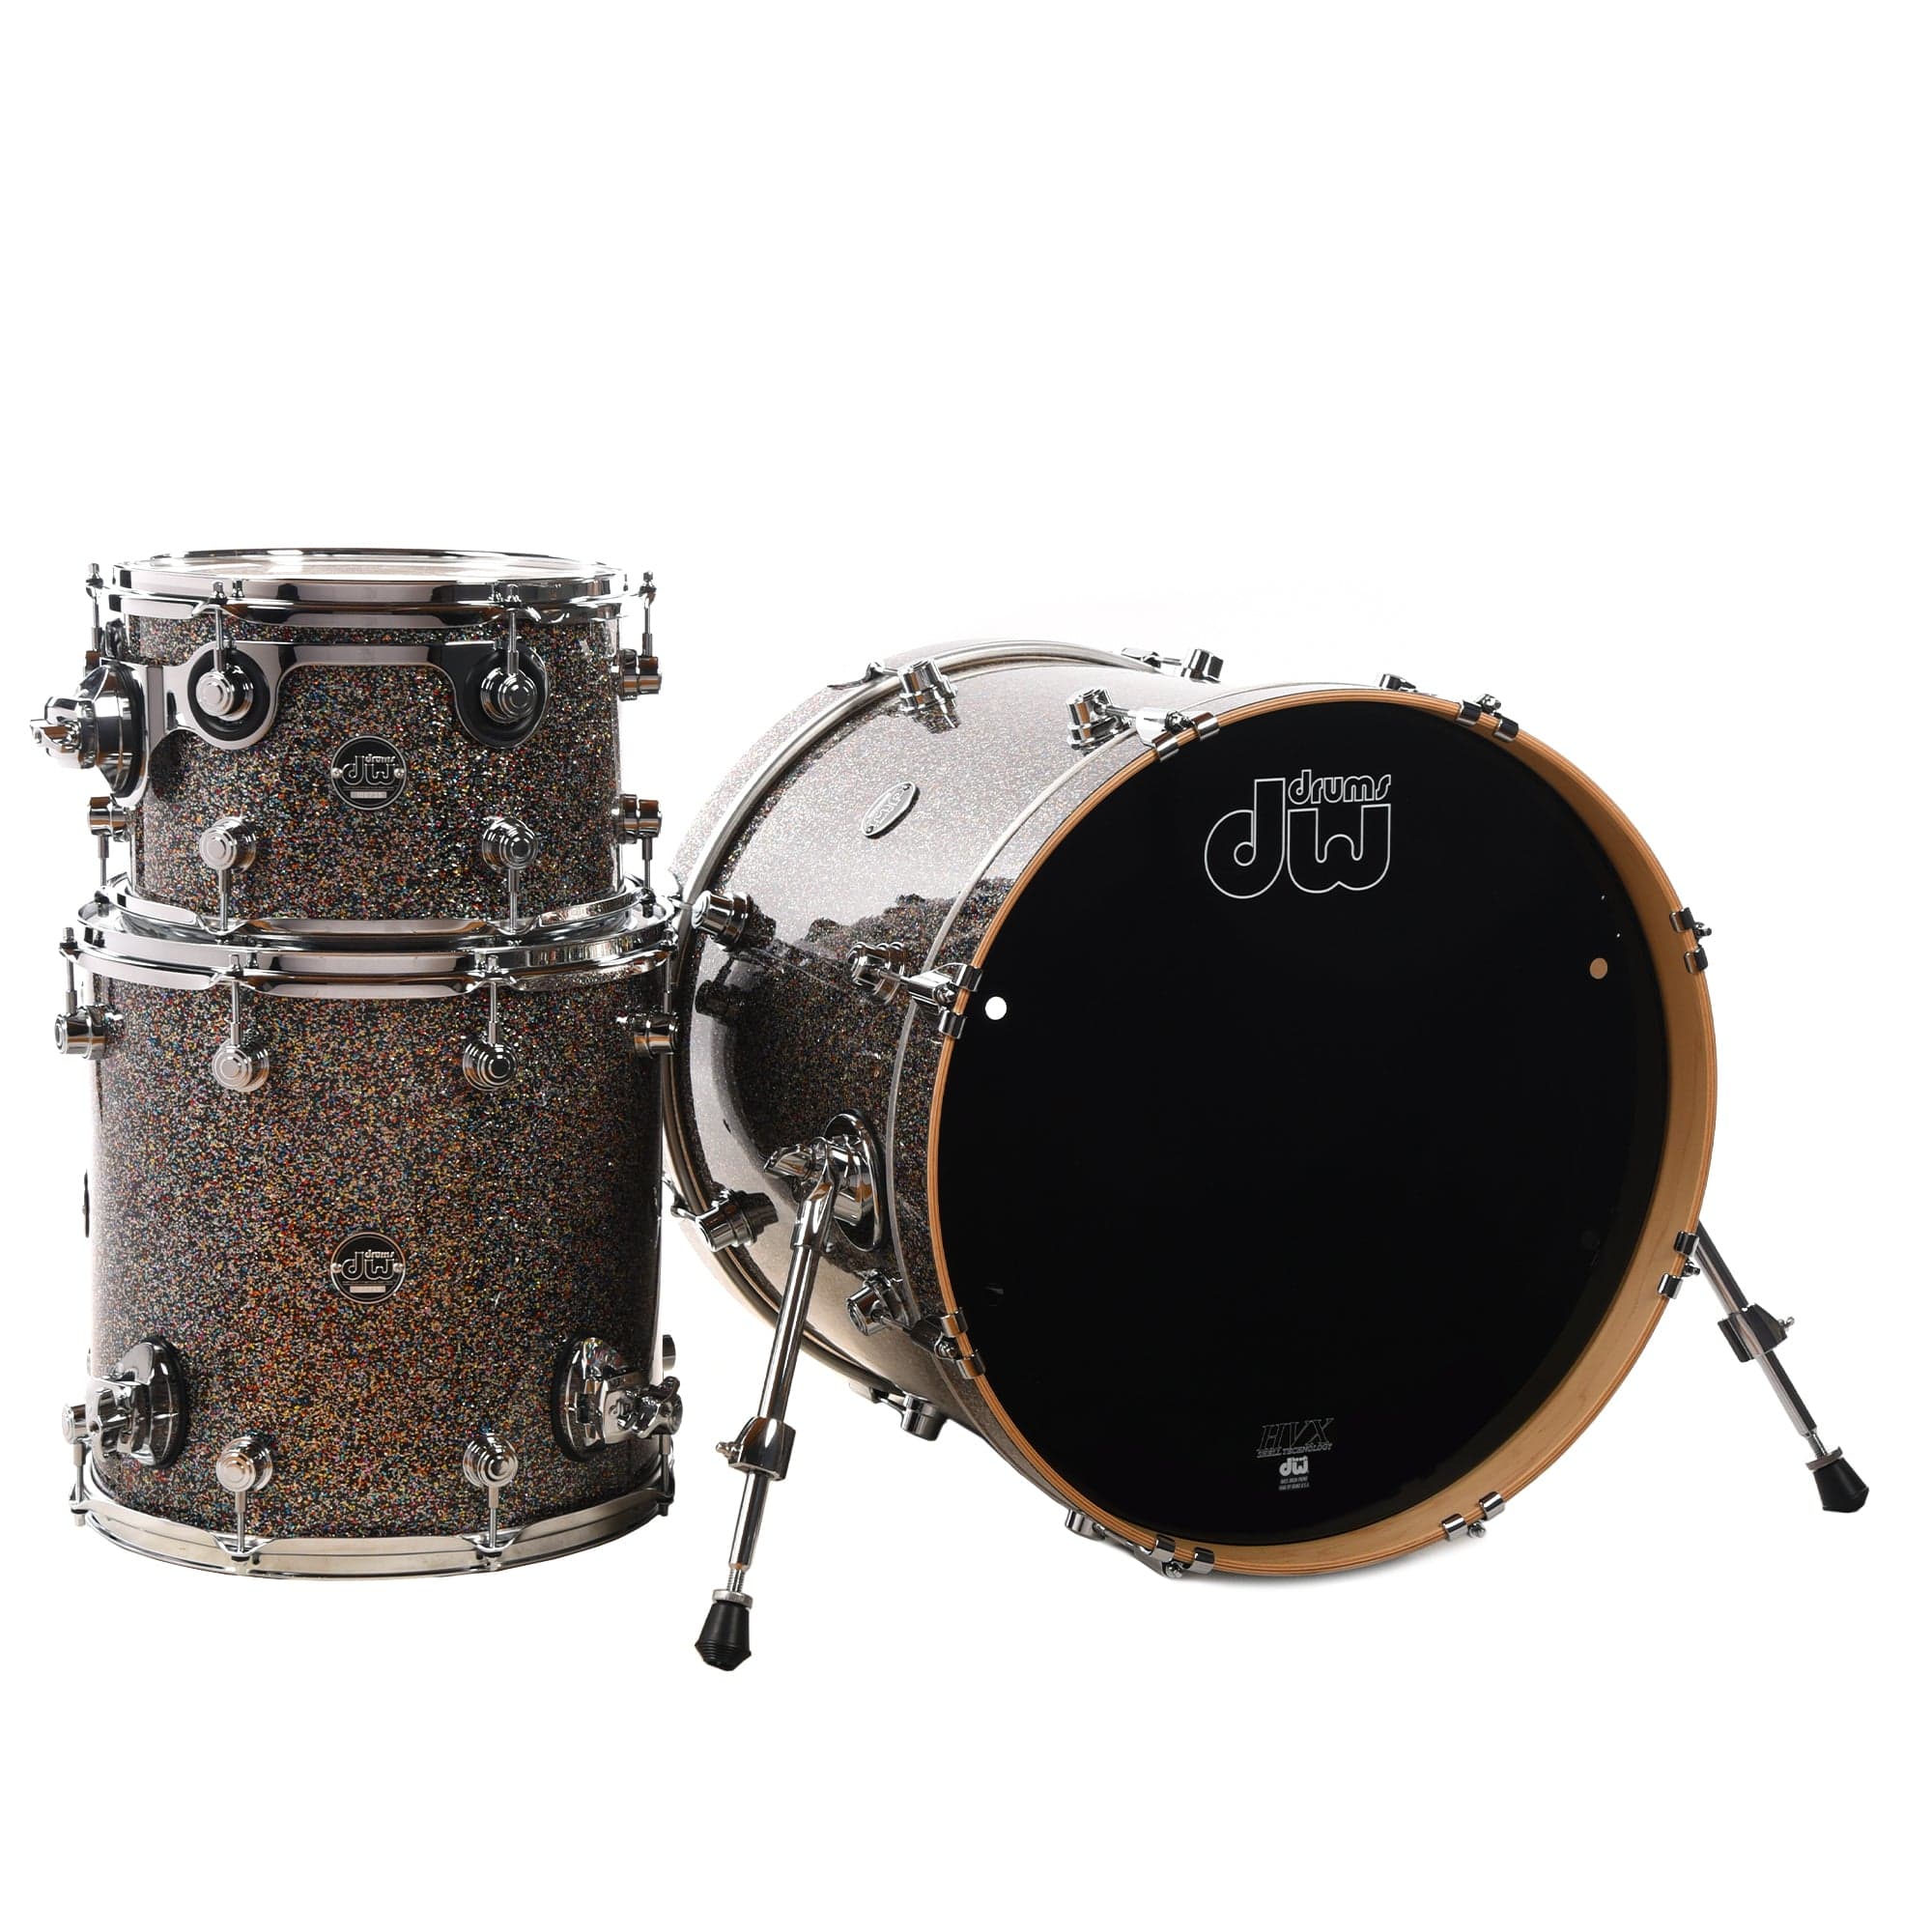 DW Performance Series 10/12/16/22 4pc. Drum Kit Confetti Sparkle Drums and Percussion / Acoustic Drums / Full Acoustic Kits